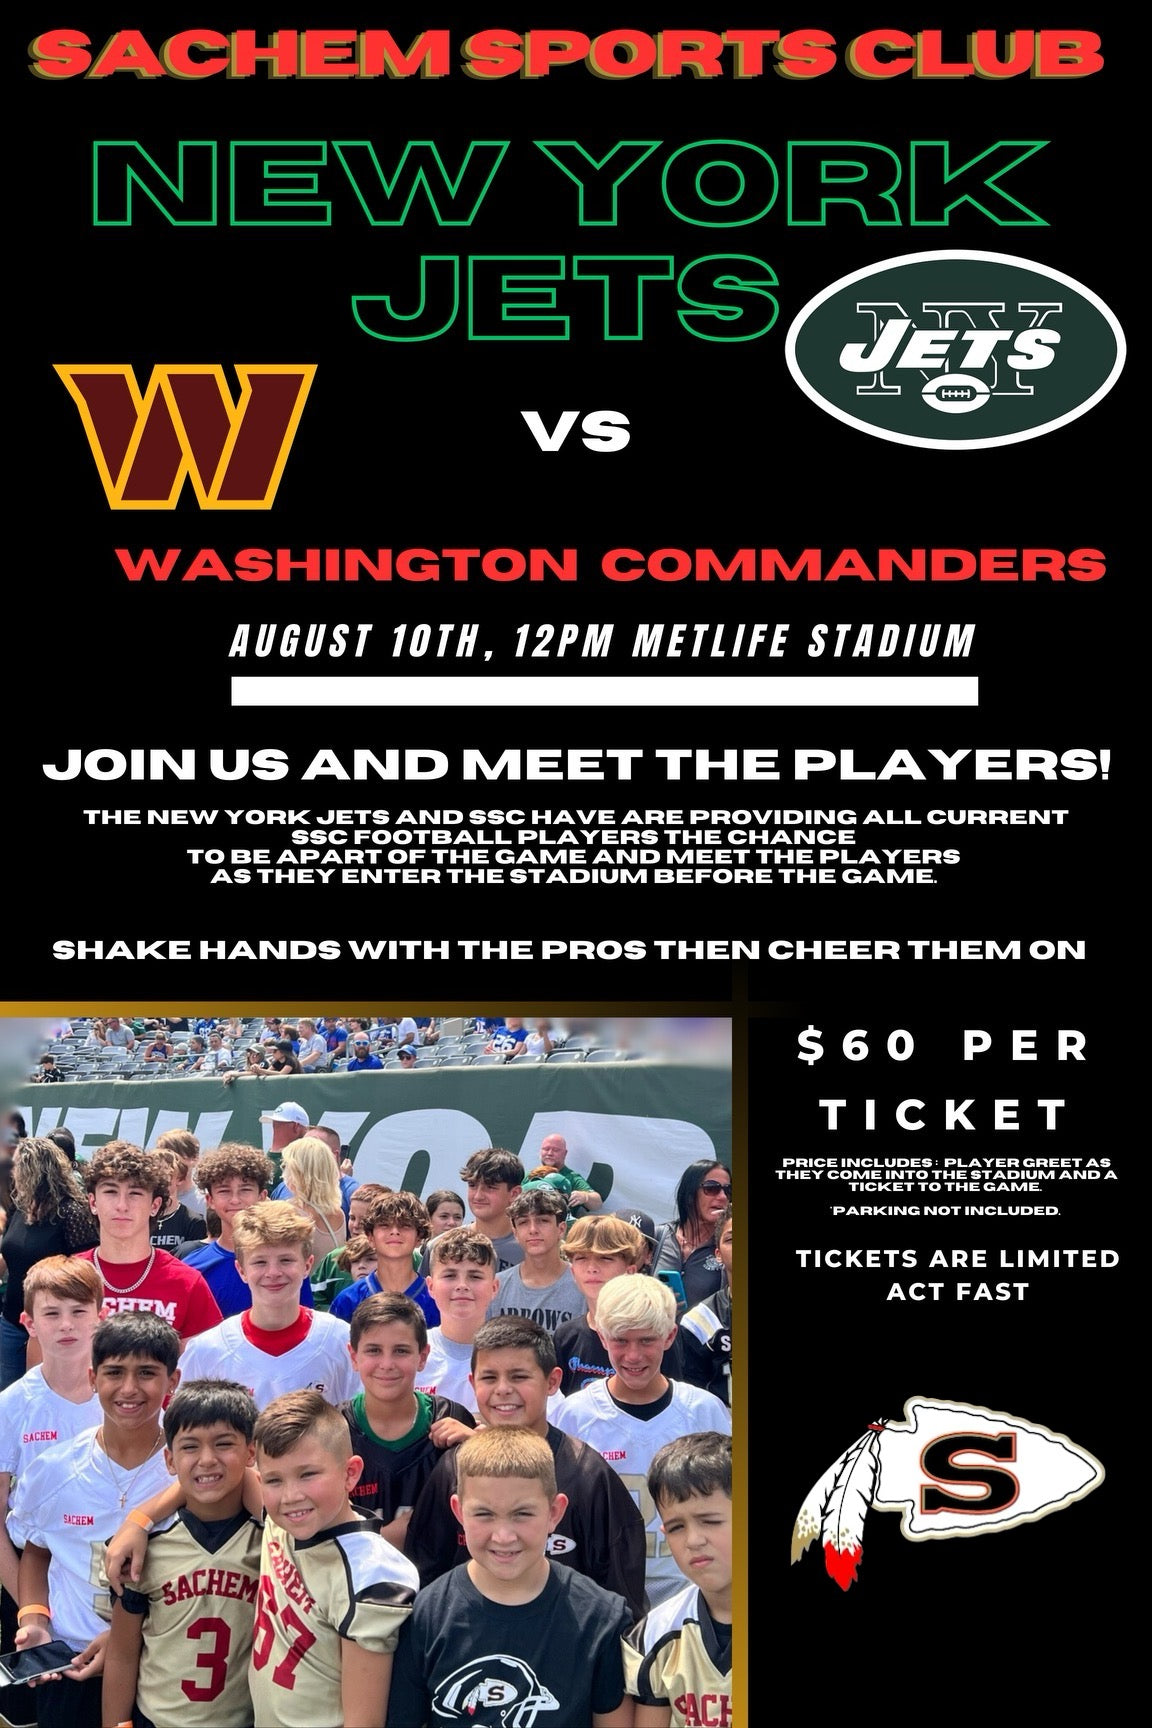 Second Annual Sachem Sports Club and NY Jets NFL Experience Day!